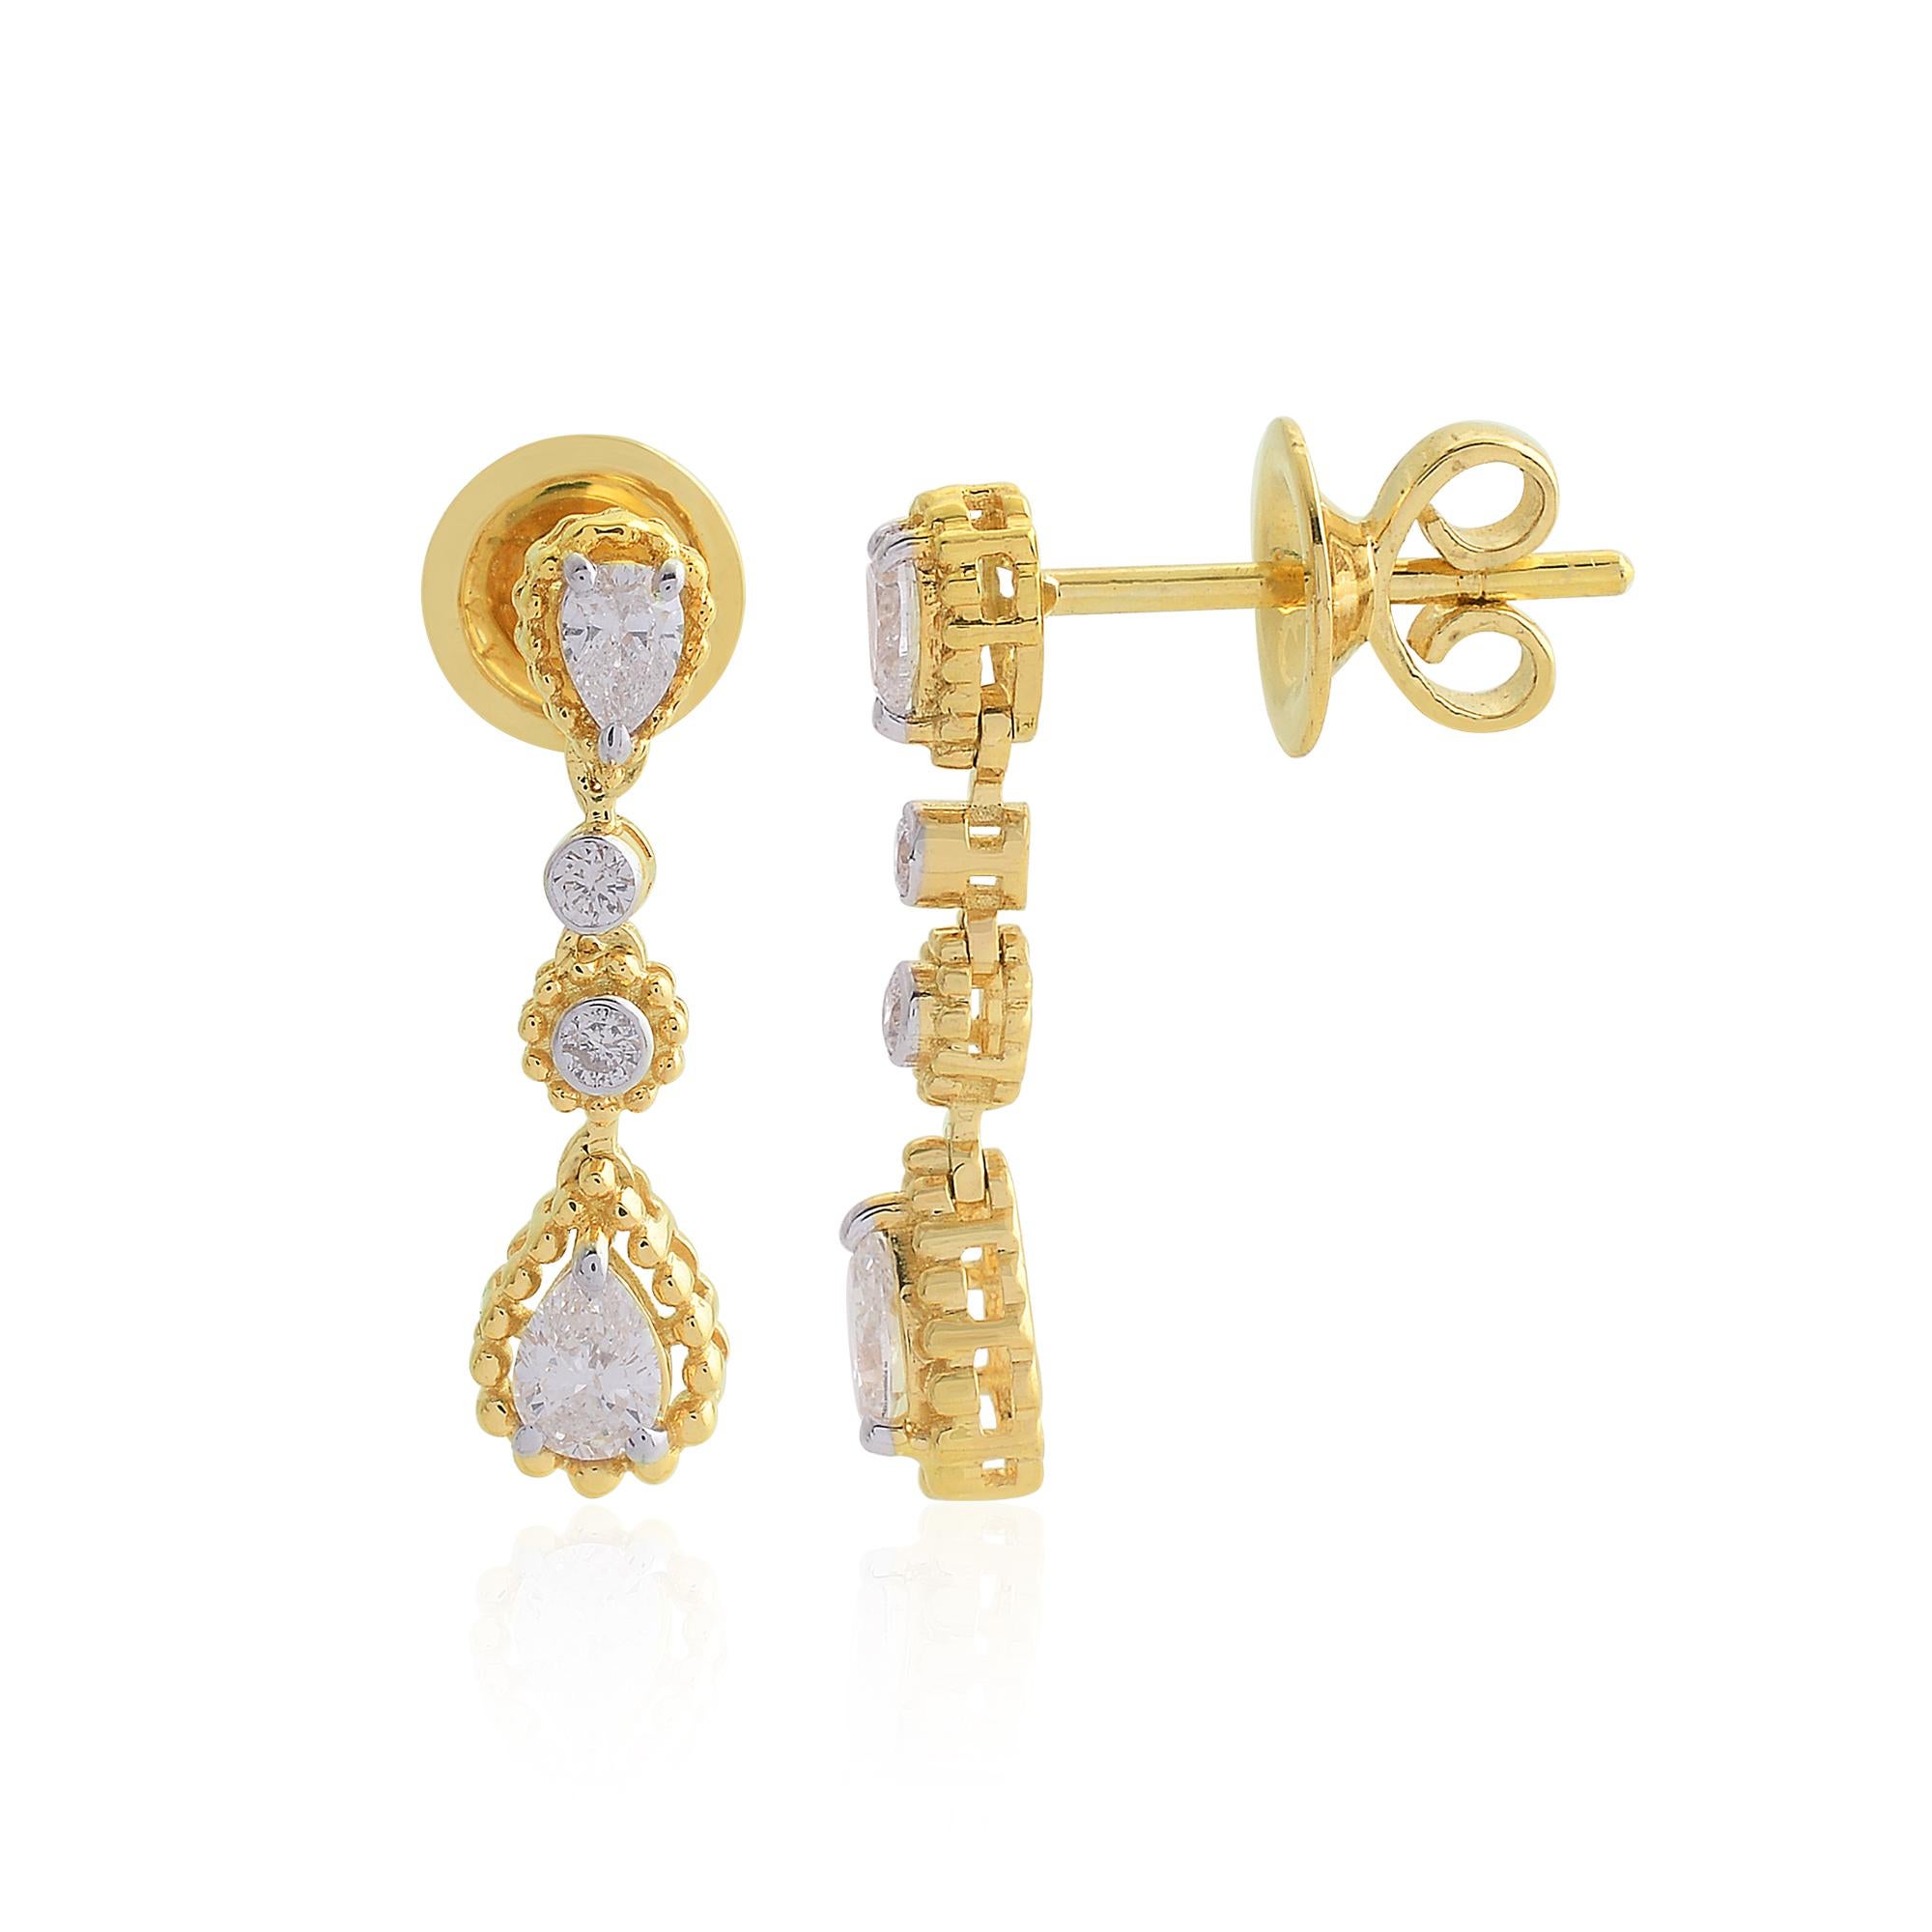 Item Code :- SEE-1526
Gross Weight :- 3.32 gm
18k Yellow Gold Weight :- 3.17 gm
Diamond Weight :- 0.74 Carat  ( AVERAGE DIAMOND CLARITY SI1-SI2 & COLOR H-I )
Earrings Length :- 20 mm approx.
✦ Sizing
.....................
We can adjust most items to